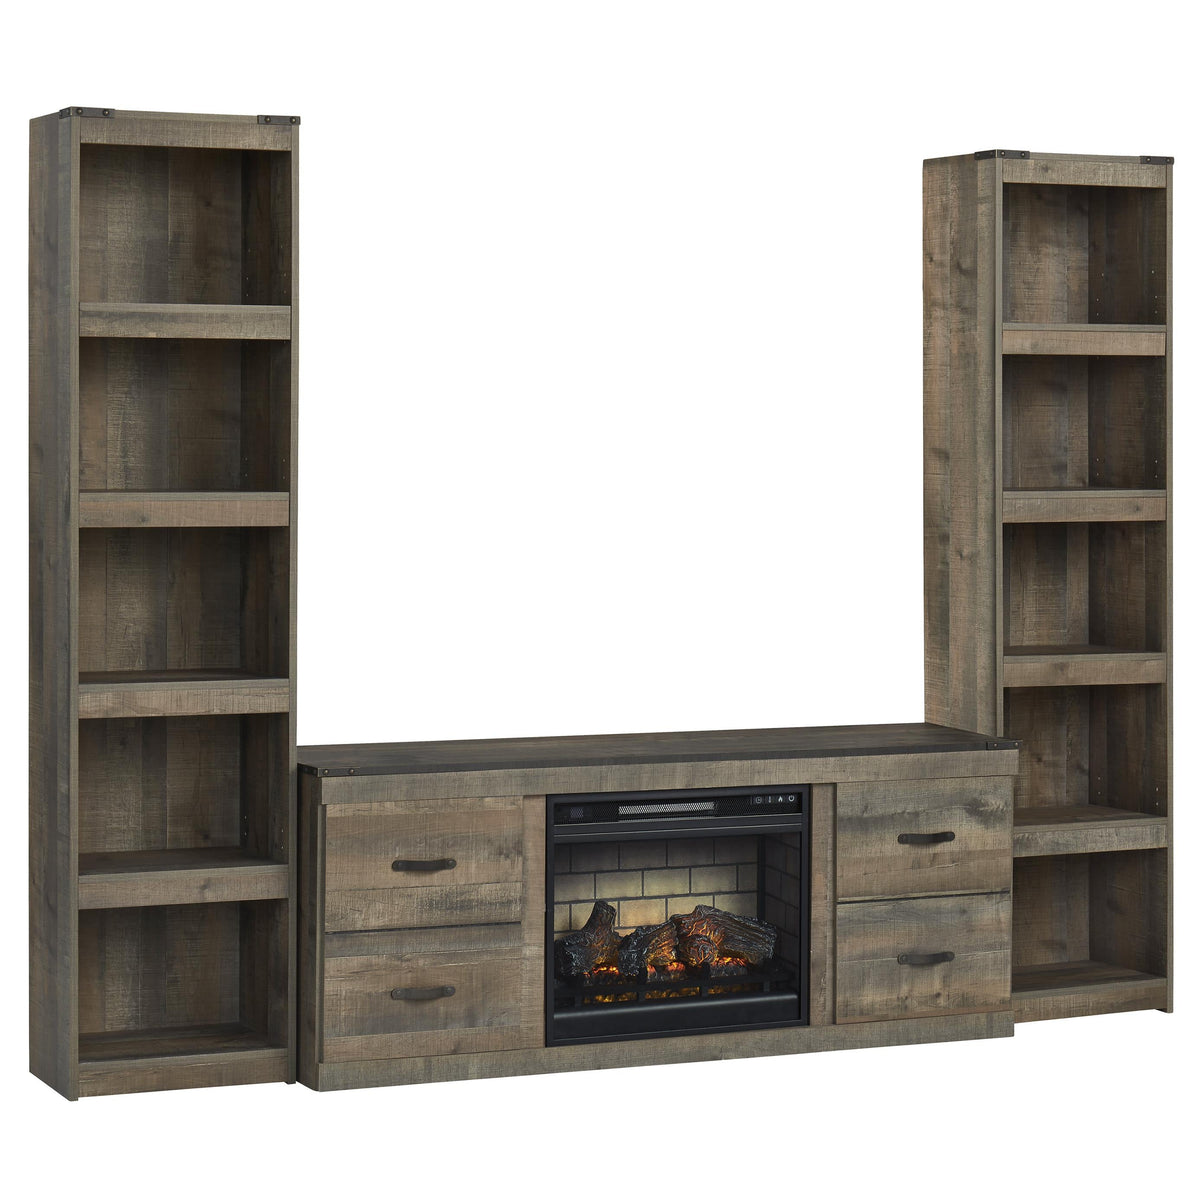 Signature Design by Ashley Trinell EW0446W11 3 pc Entertainment Center with Electric Fireplace